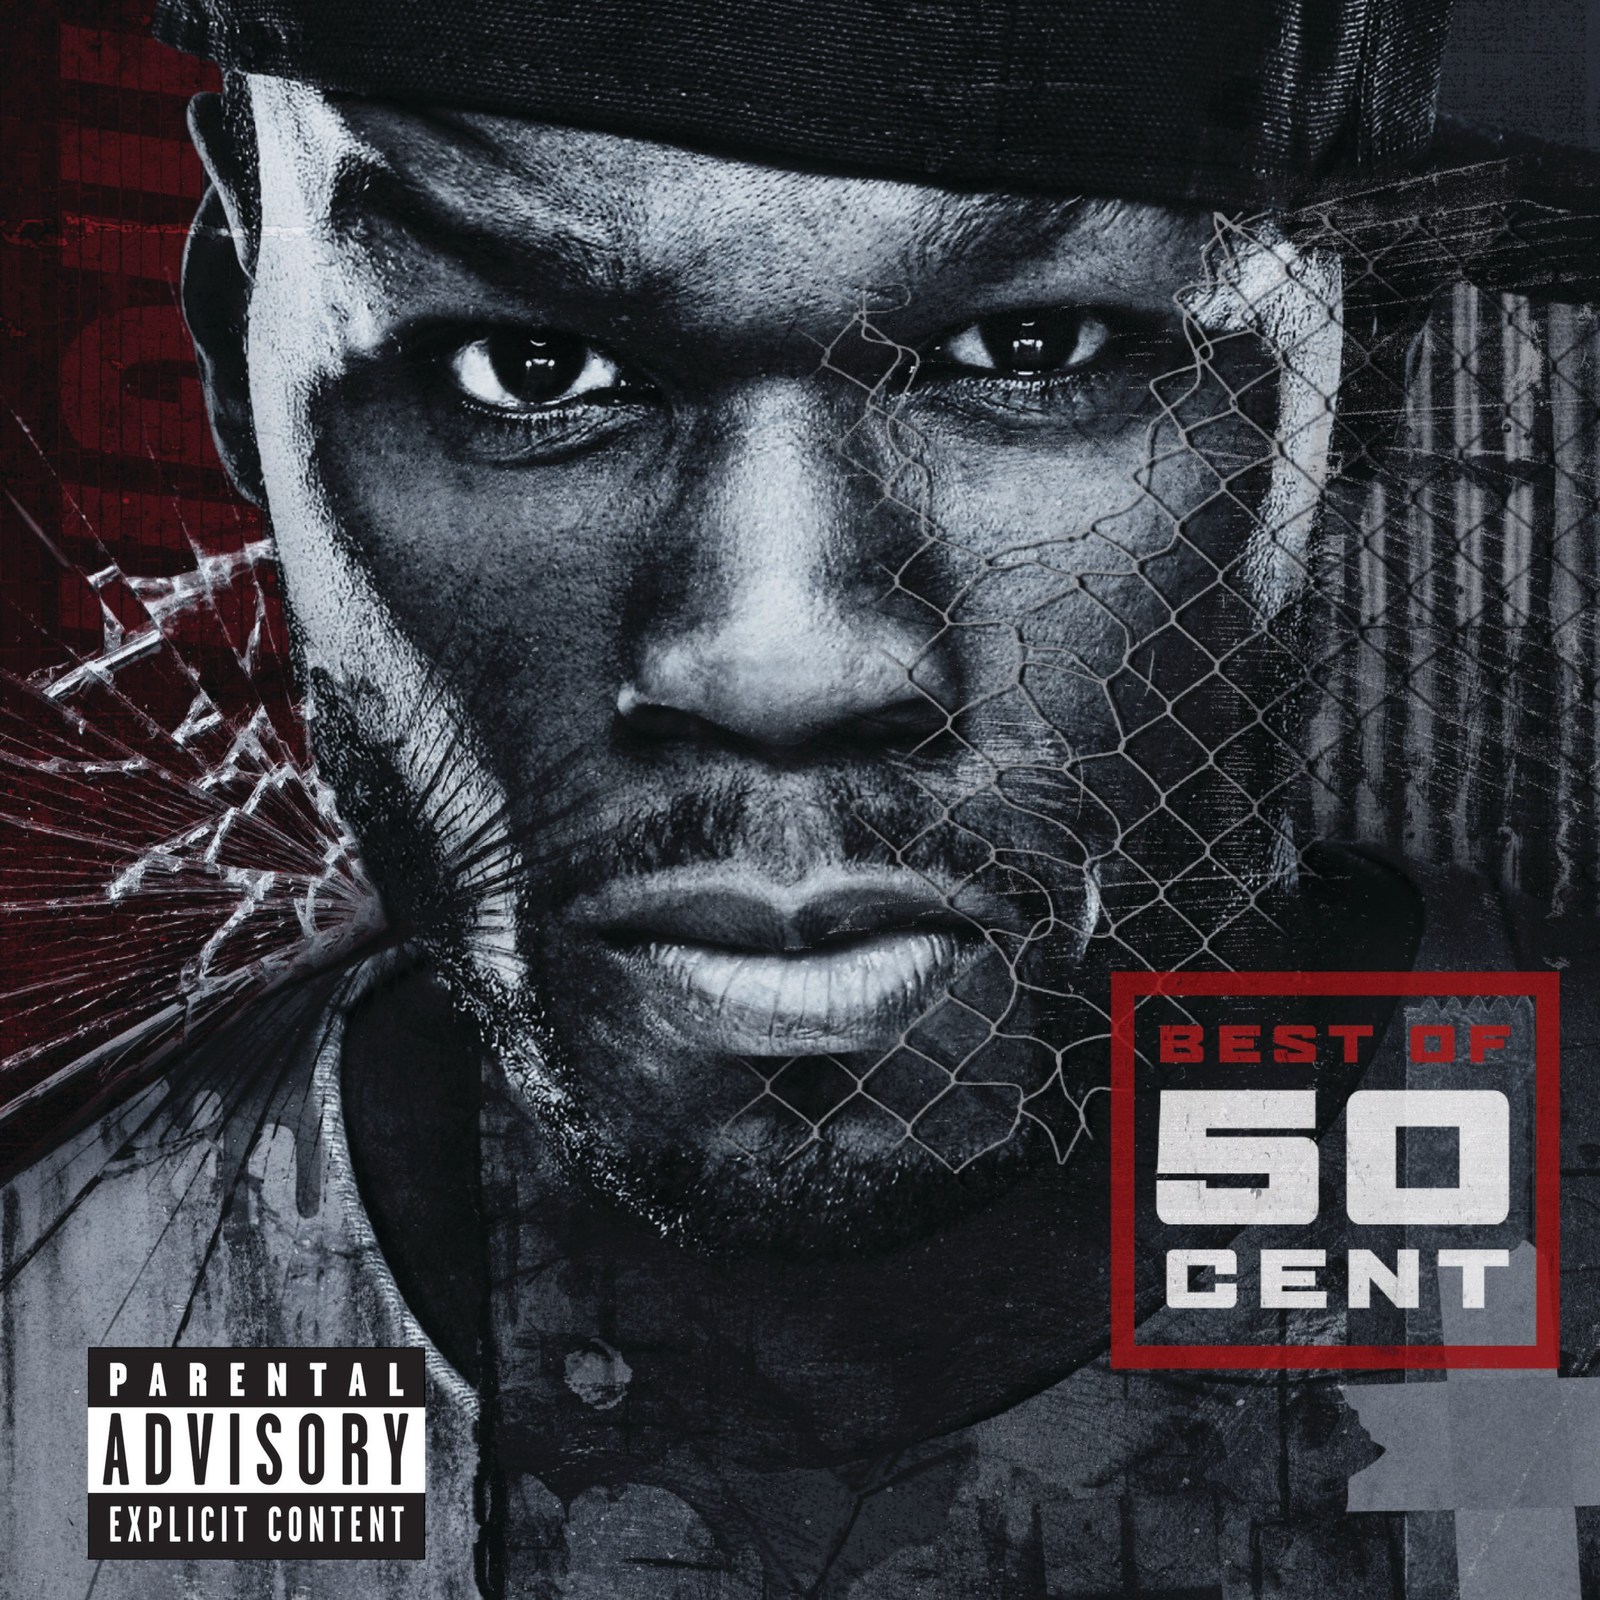 Universal Music Announces 'Best of 50 Cent' Greatest Hits Collection